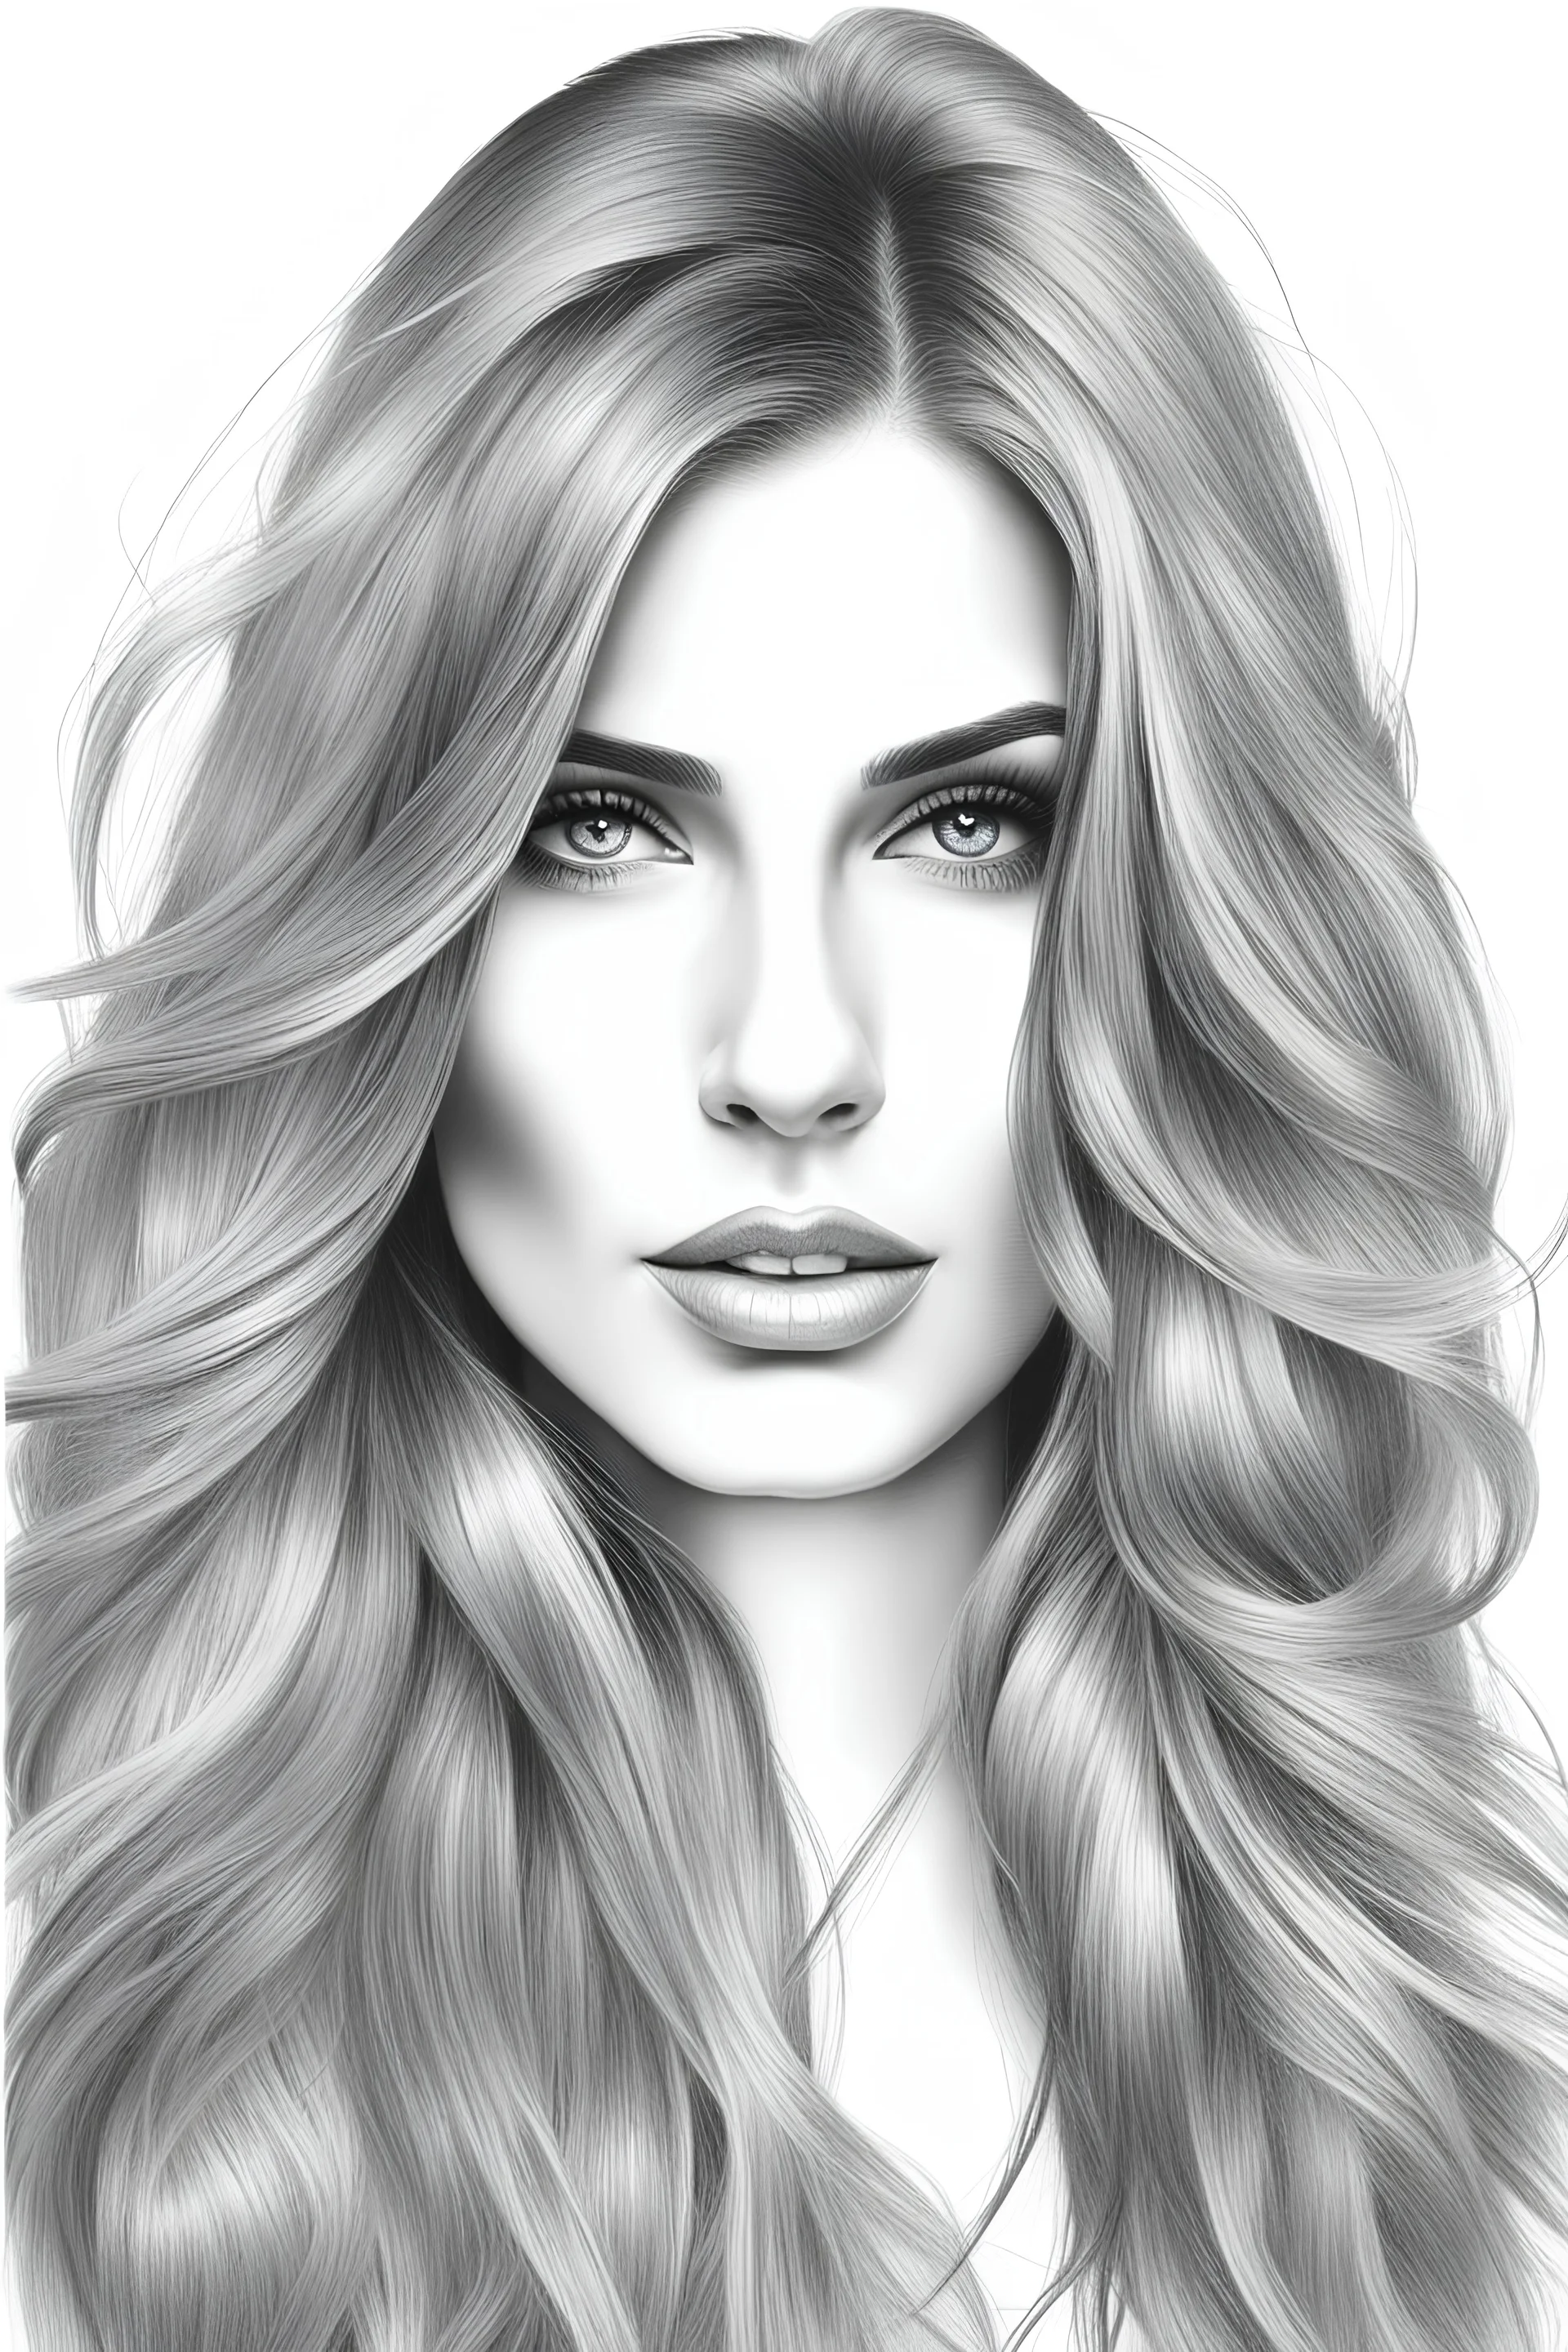 A beautiful Woman with very long Brown hair , realistic, photorealistic